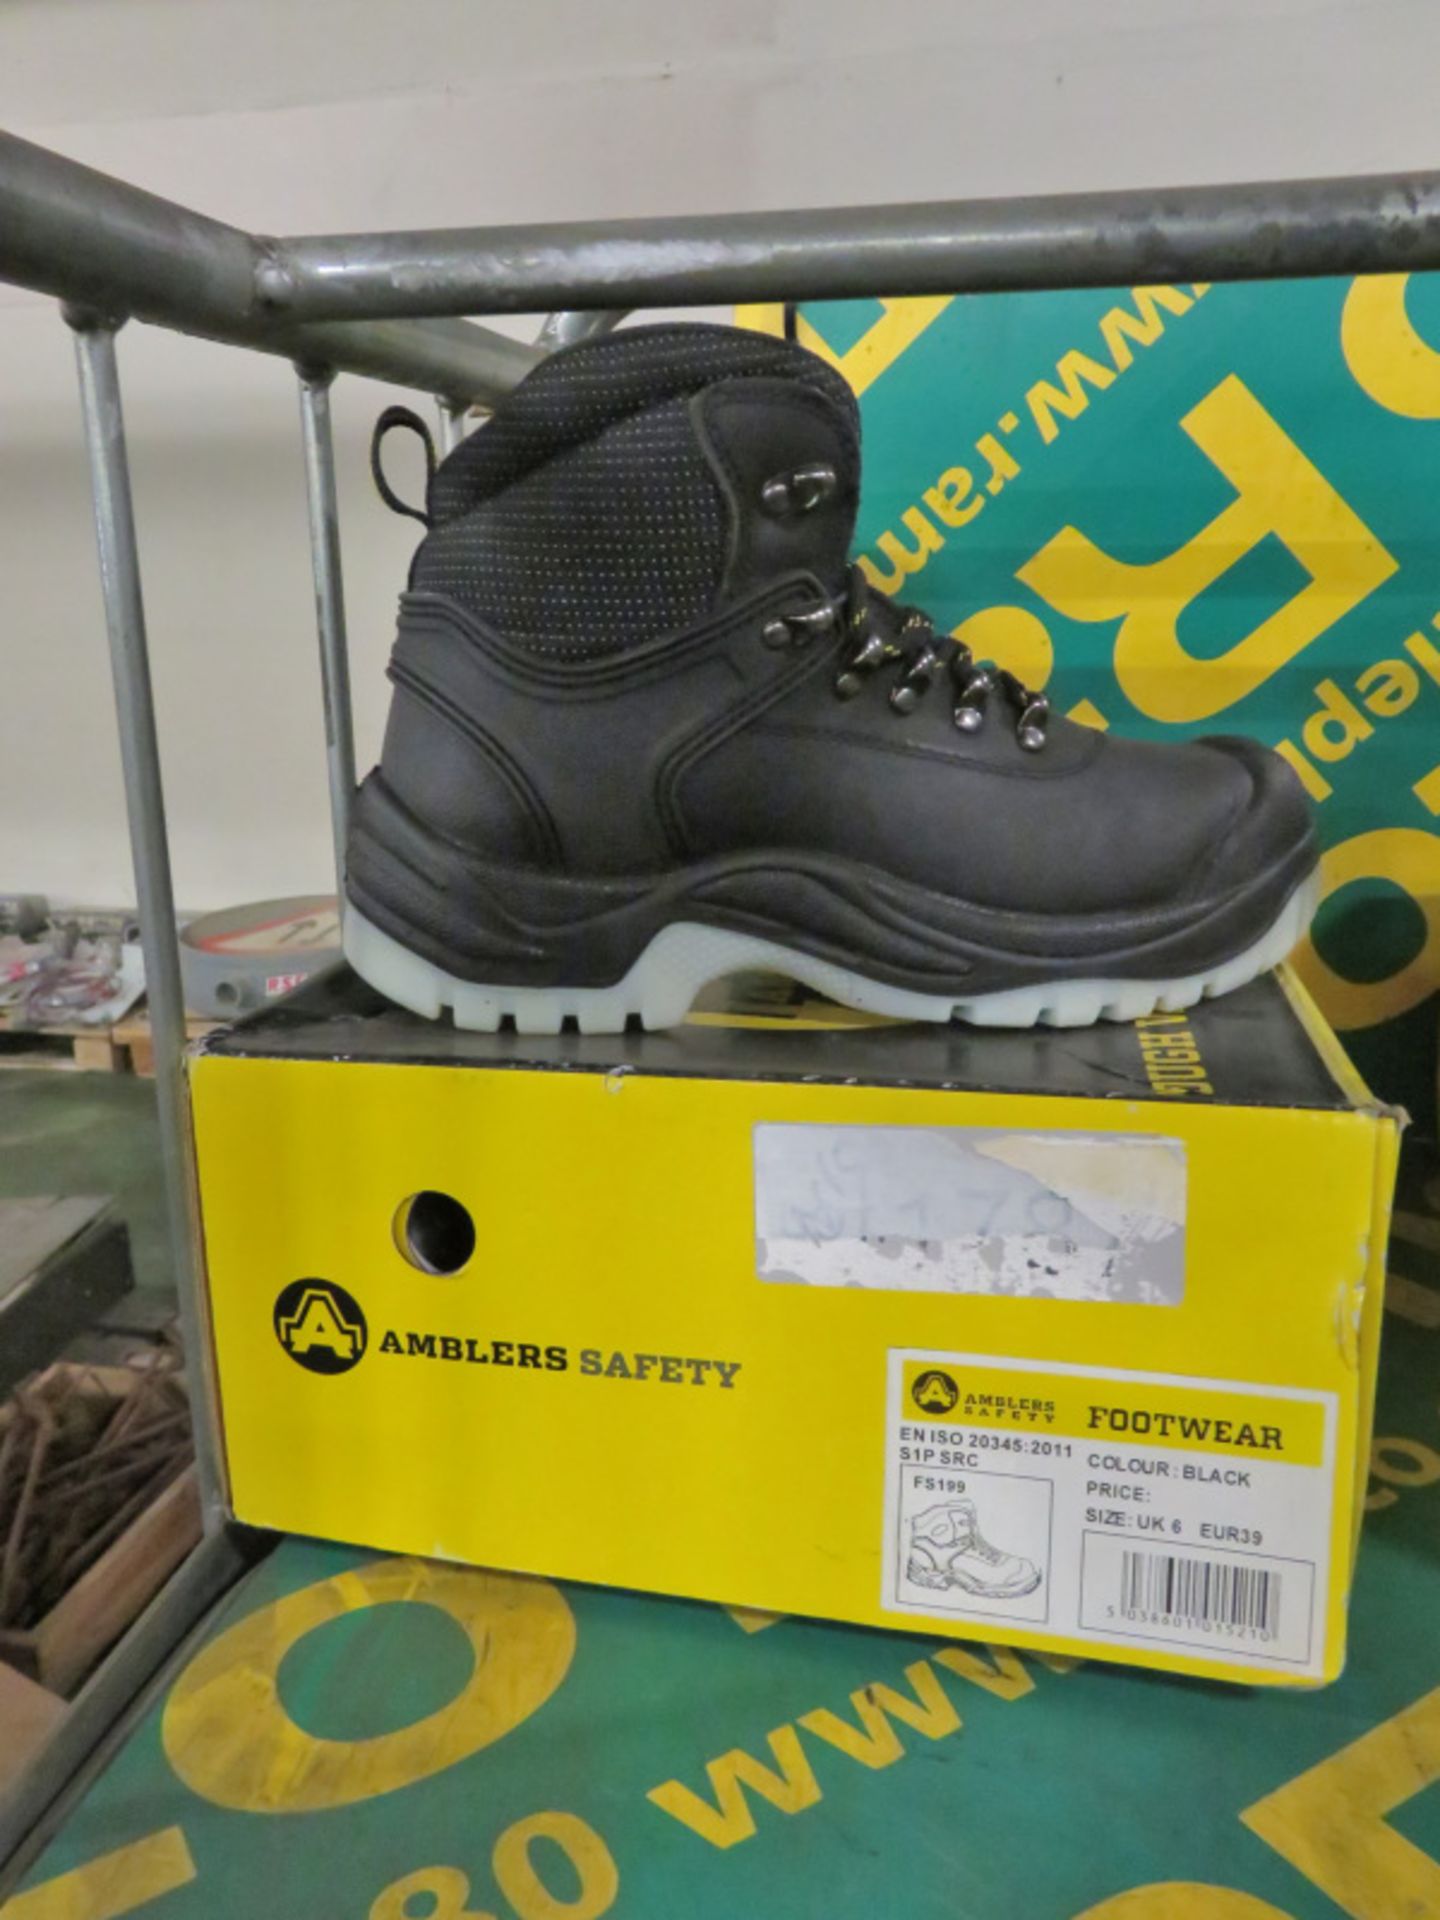 3x Pairs of Amblers Safety Boots - EU39 / UK6 - Image 6 of 7